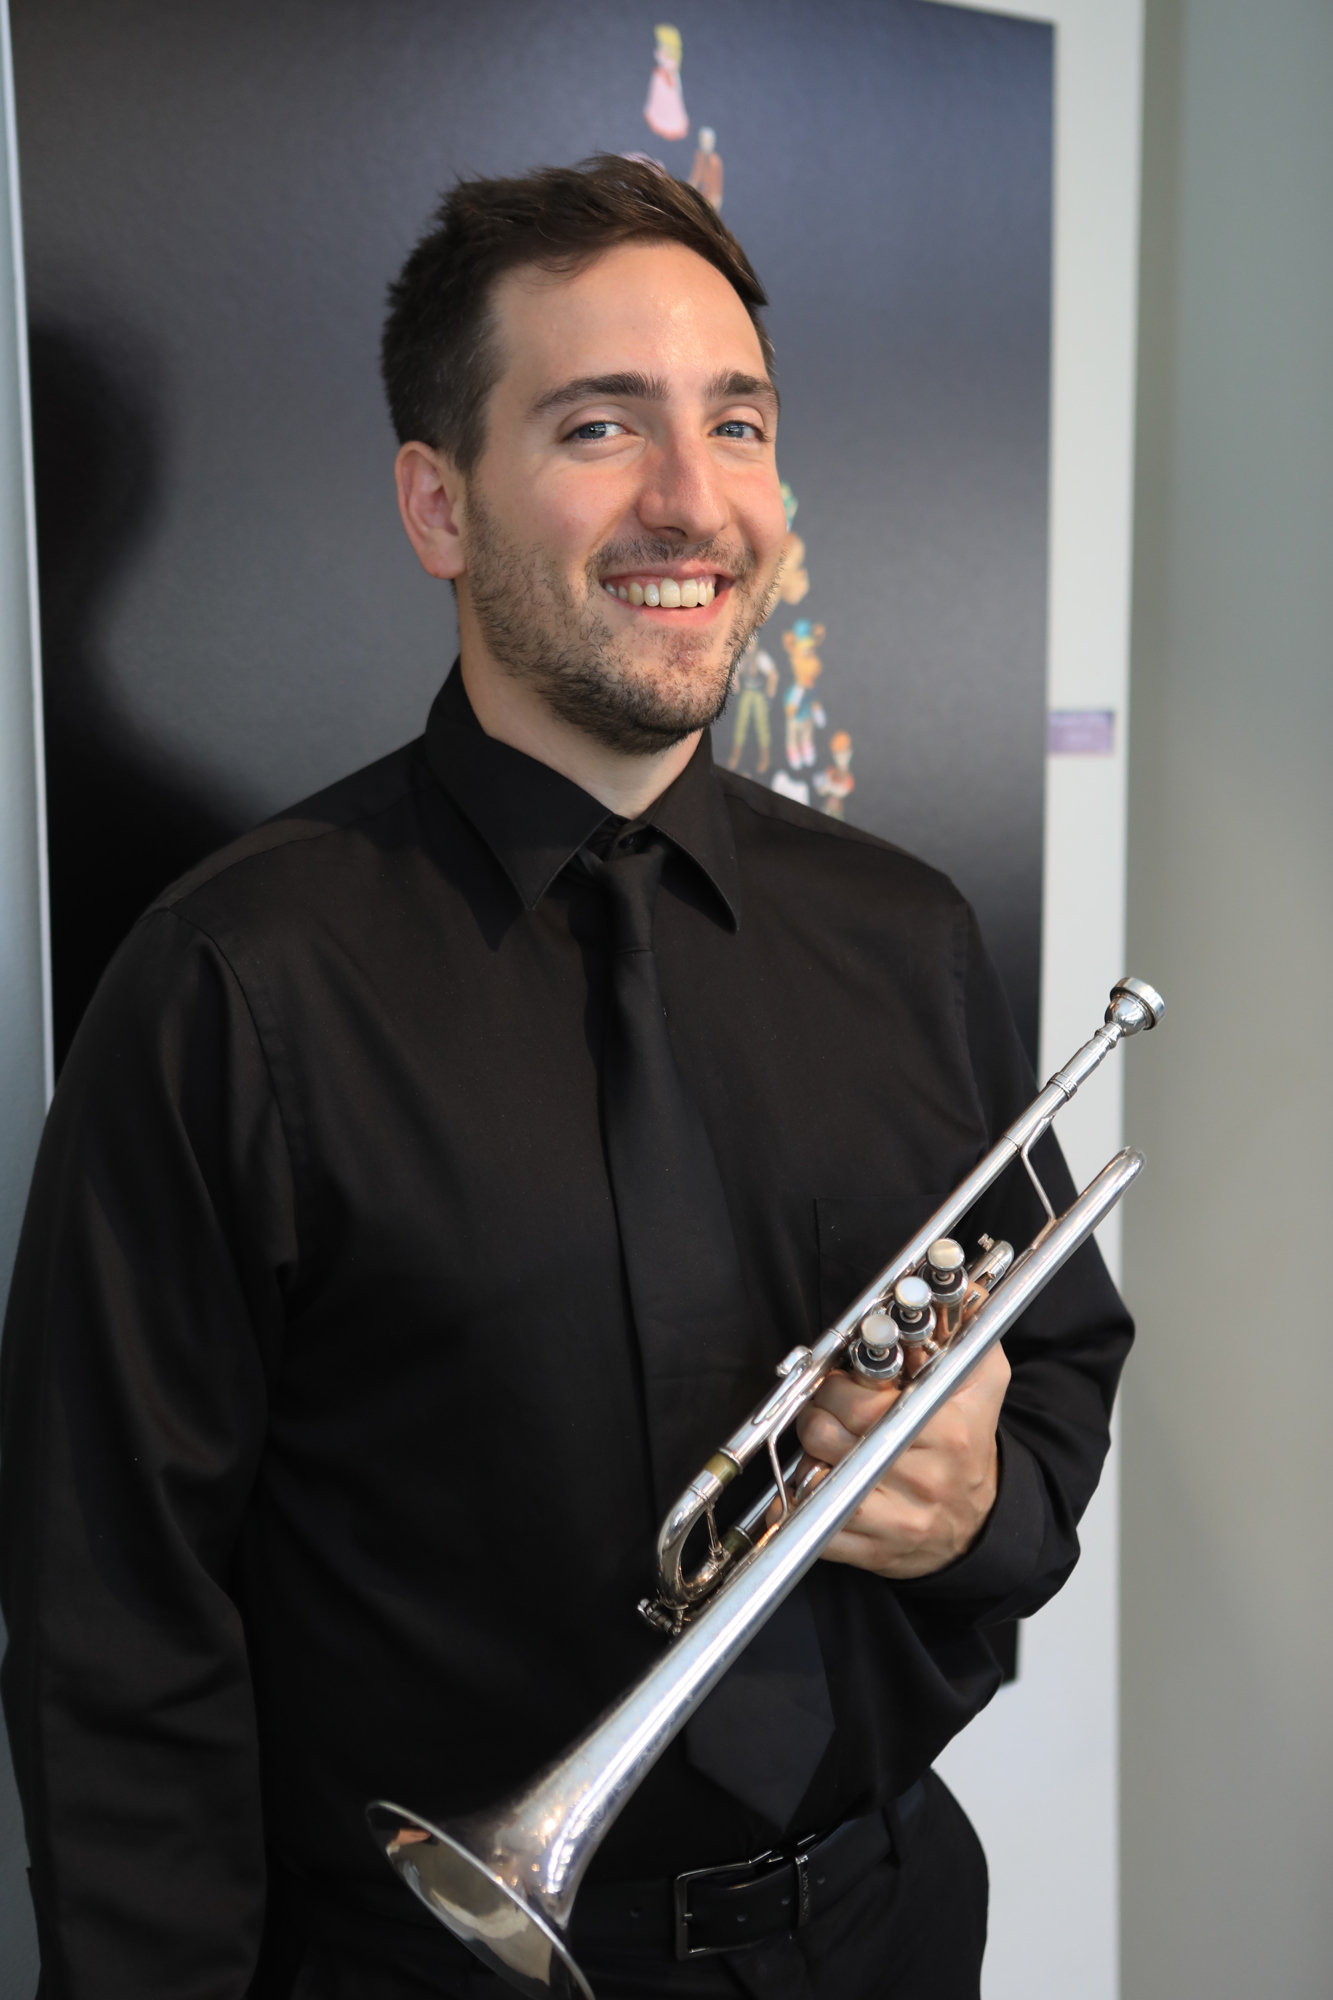 New York native Gianluca Farina is Sarasota Orchestra's new principal trumpet player. (Photo by Harry Sayer)